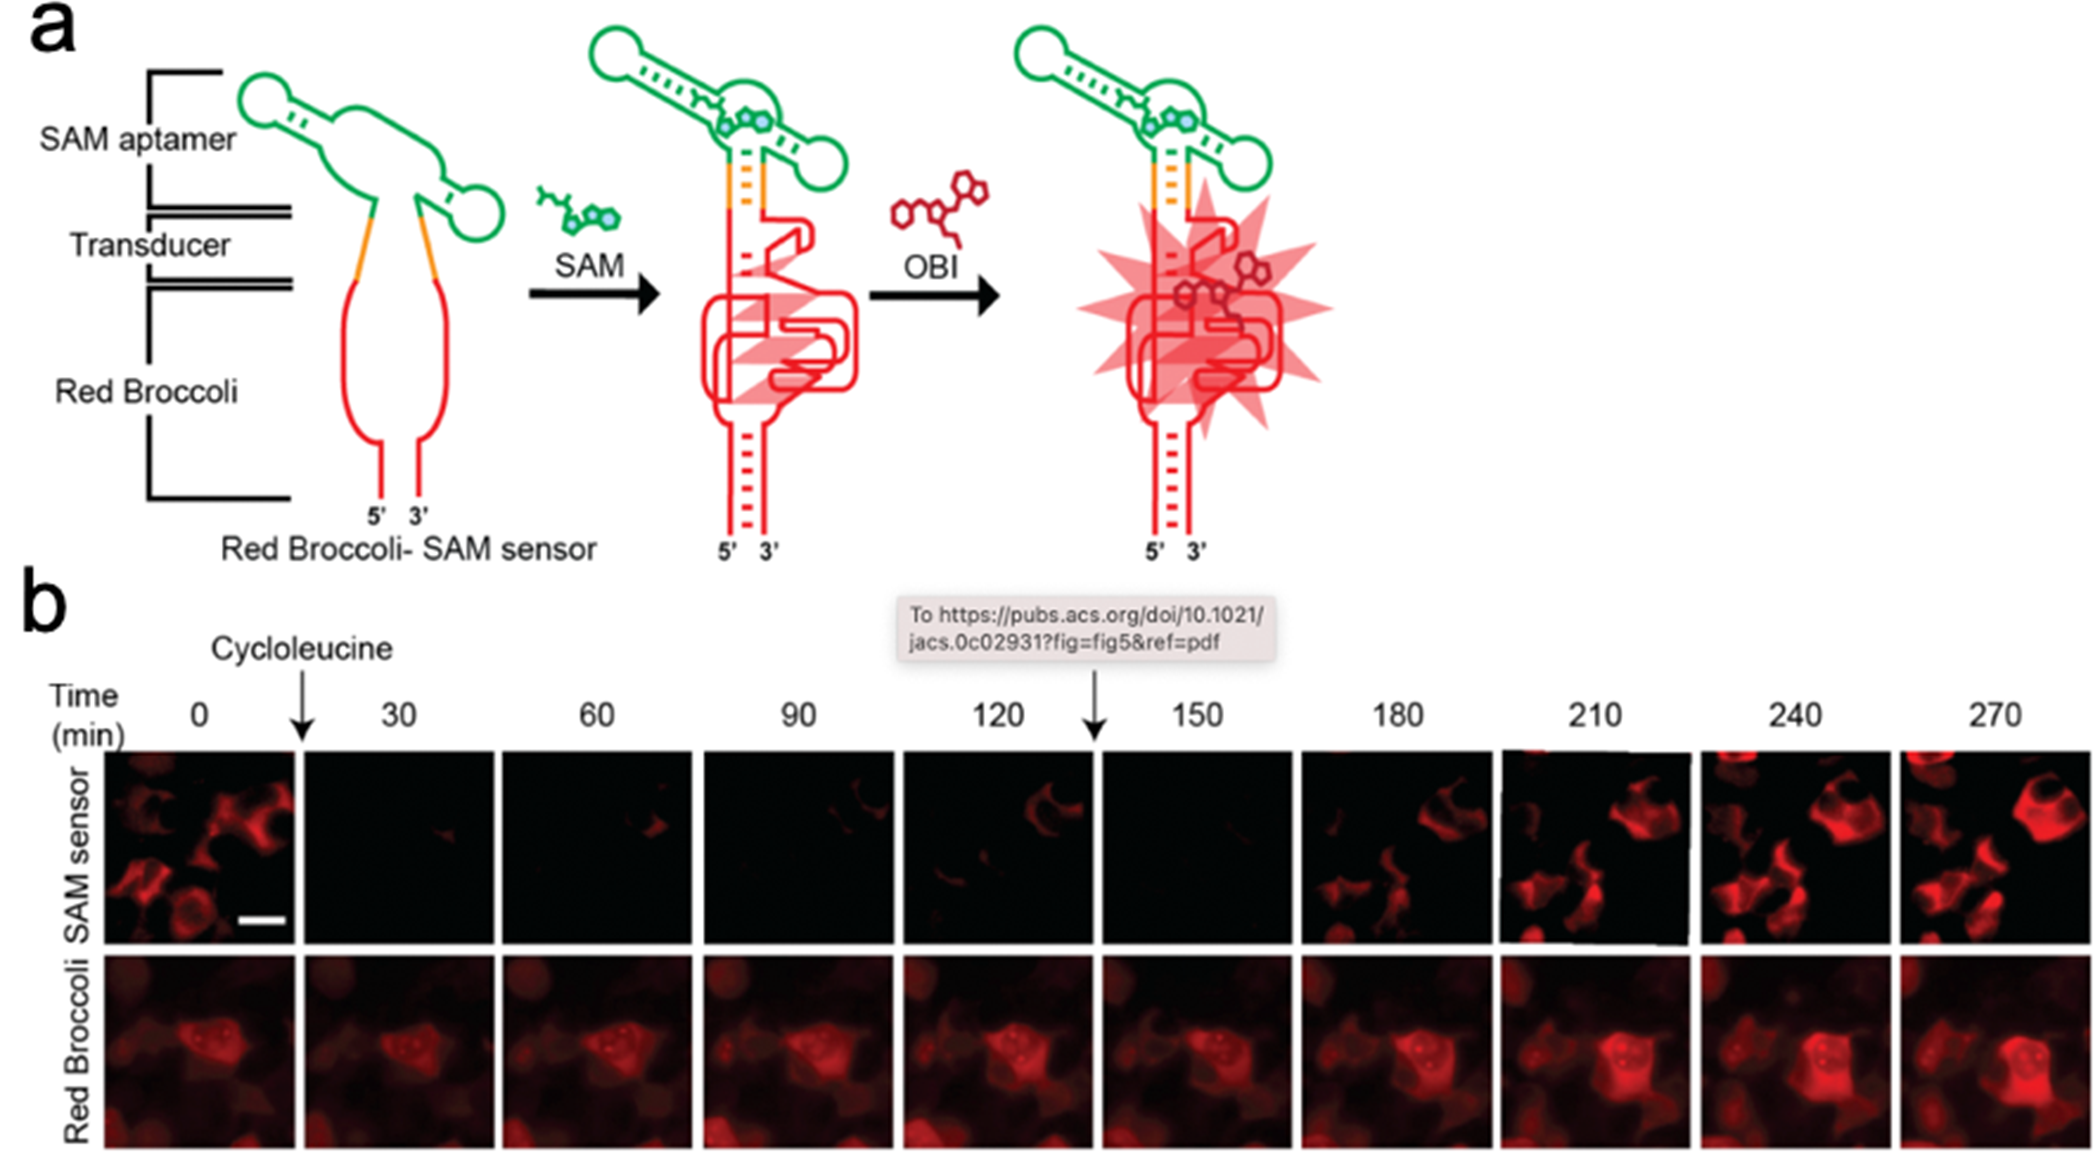 Working mechanism of SAM sensor, and fluorescence imaging of cells expressing the Red Broccoli™-based SAM sensor or Red Broccoli™ alone